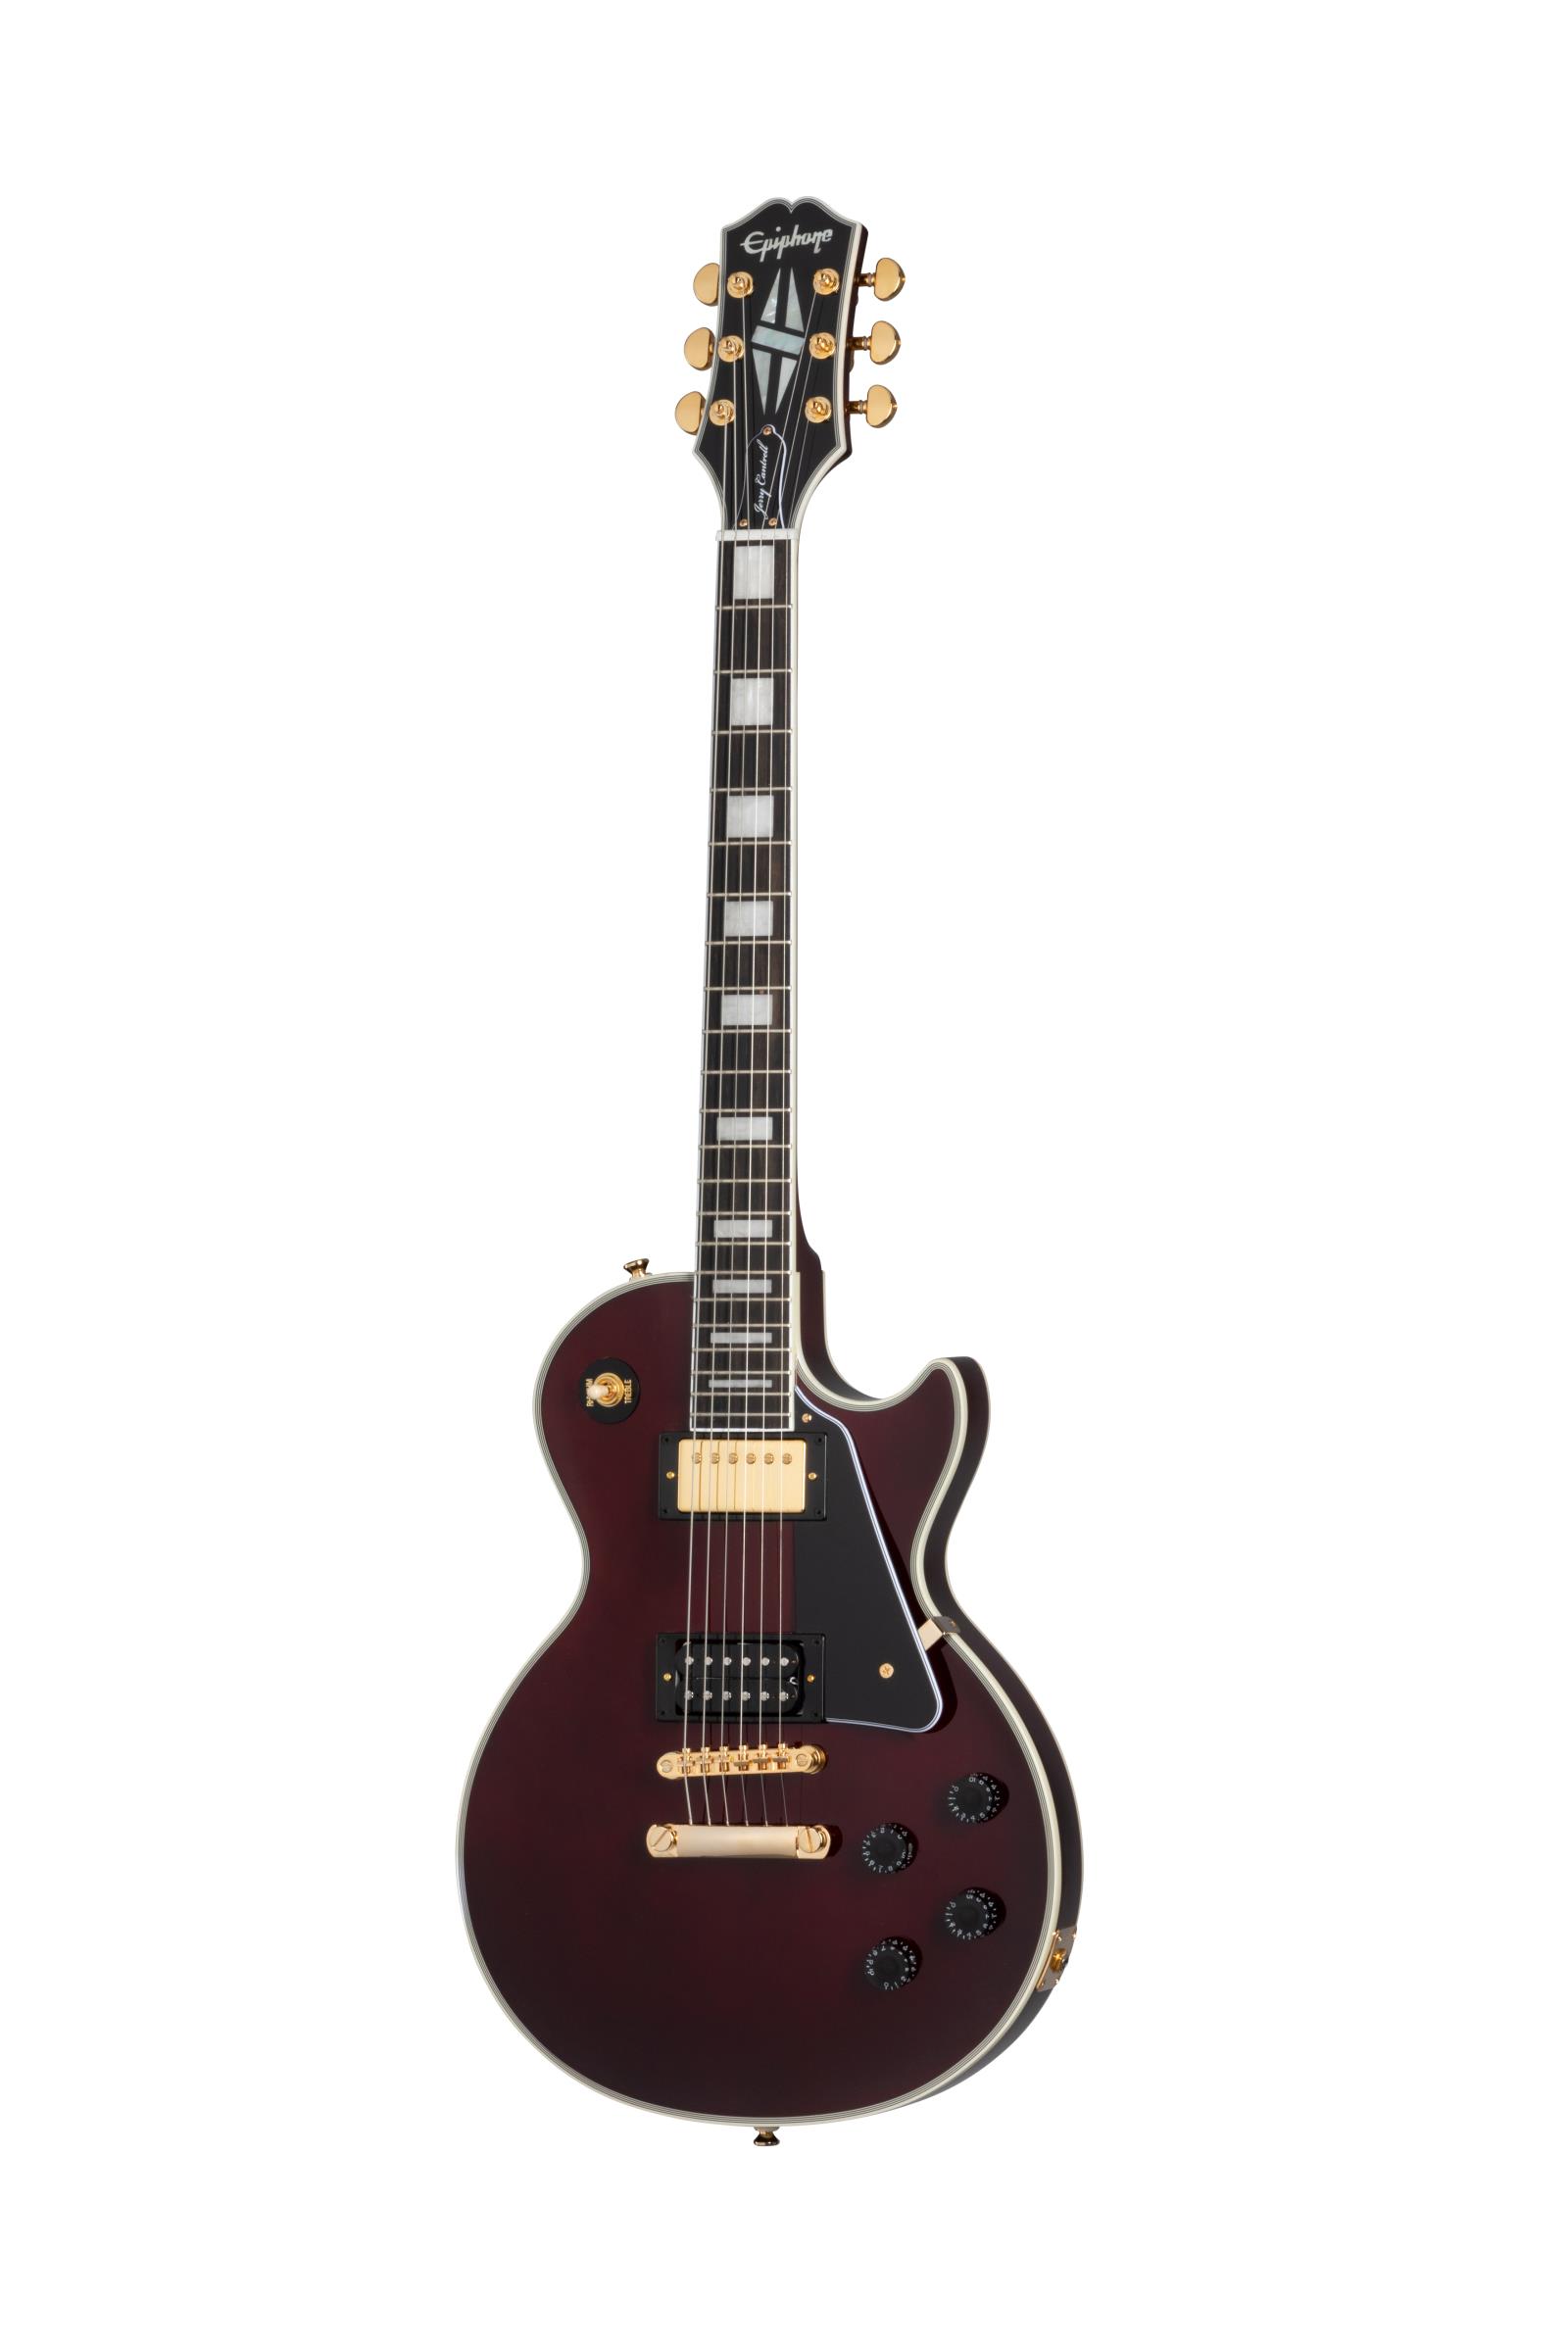 EPIPHONE Jerry Cantrell "Wino" Les Paul Custom